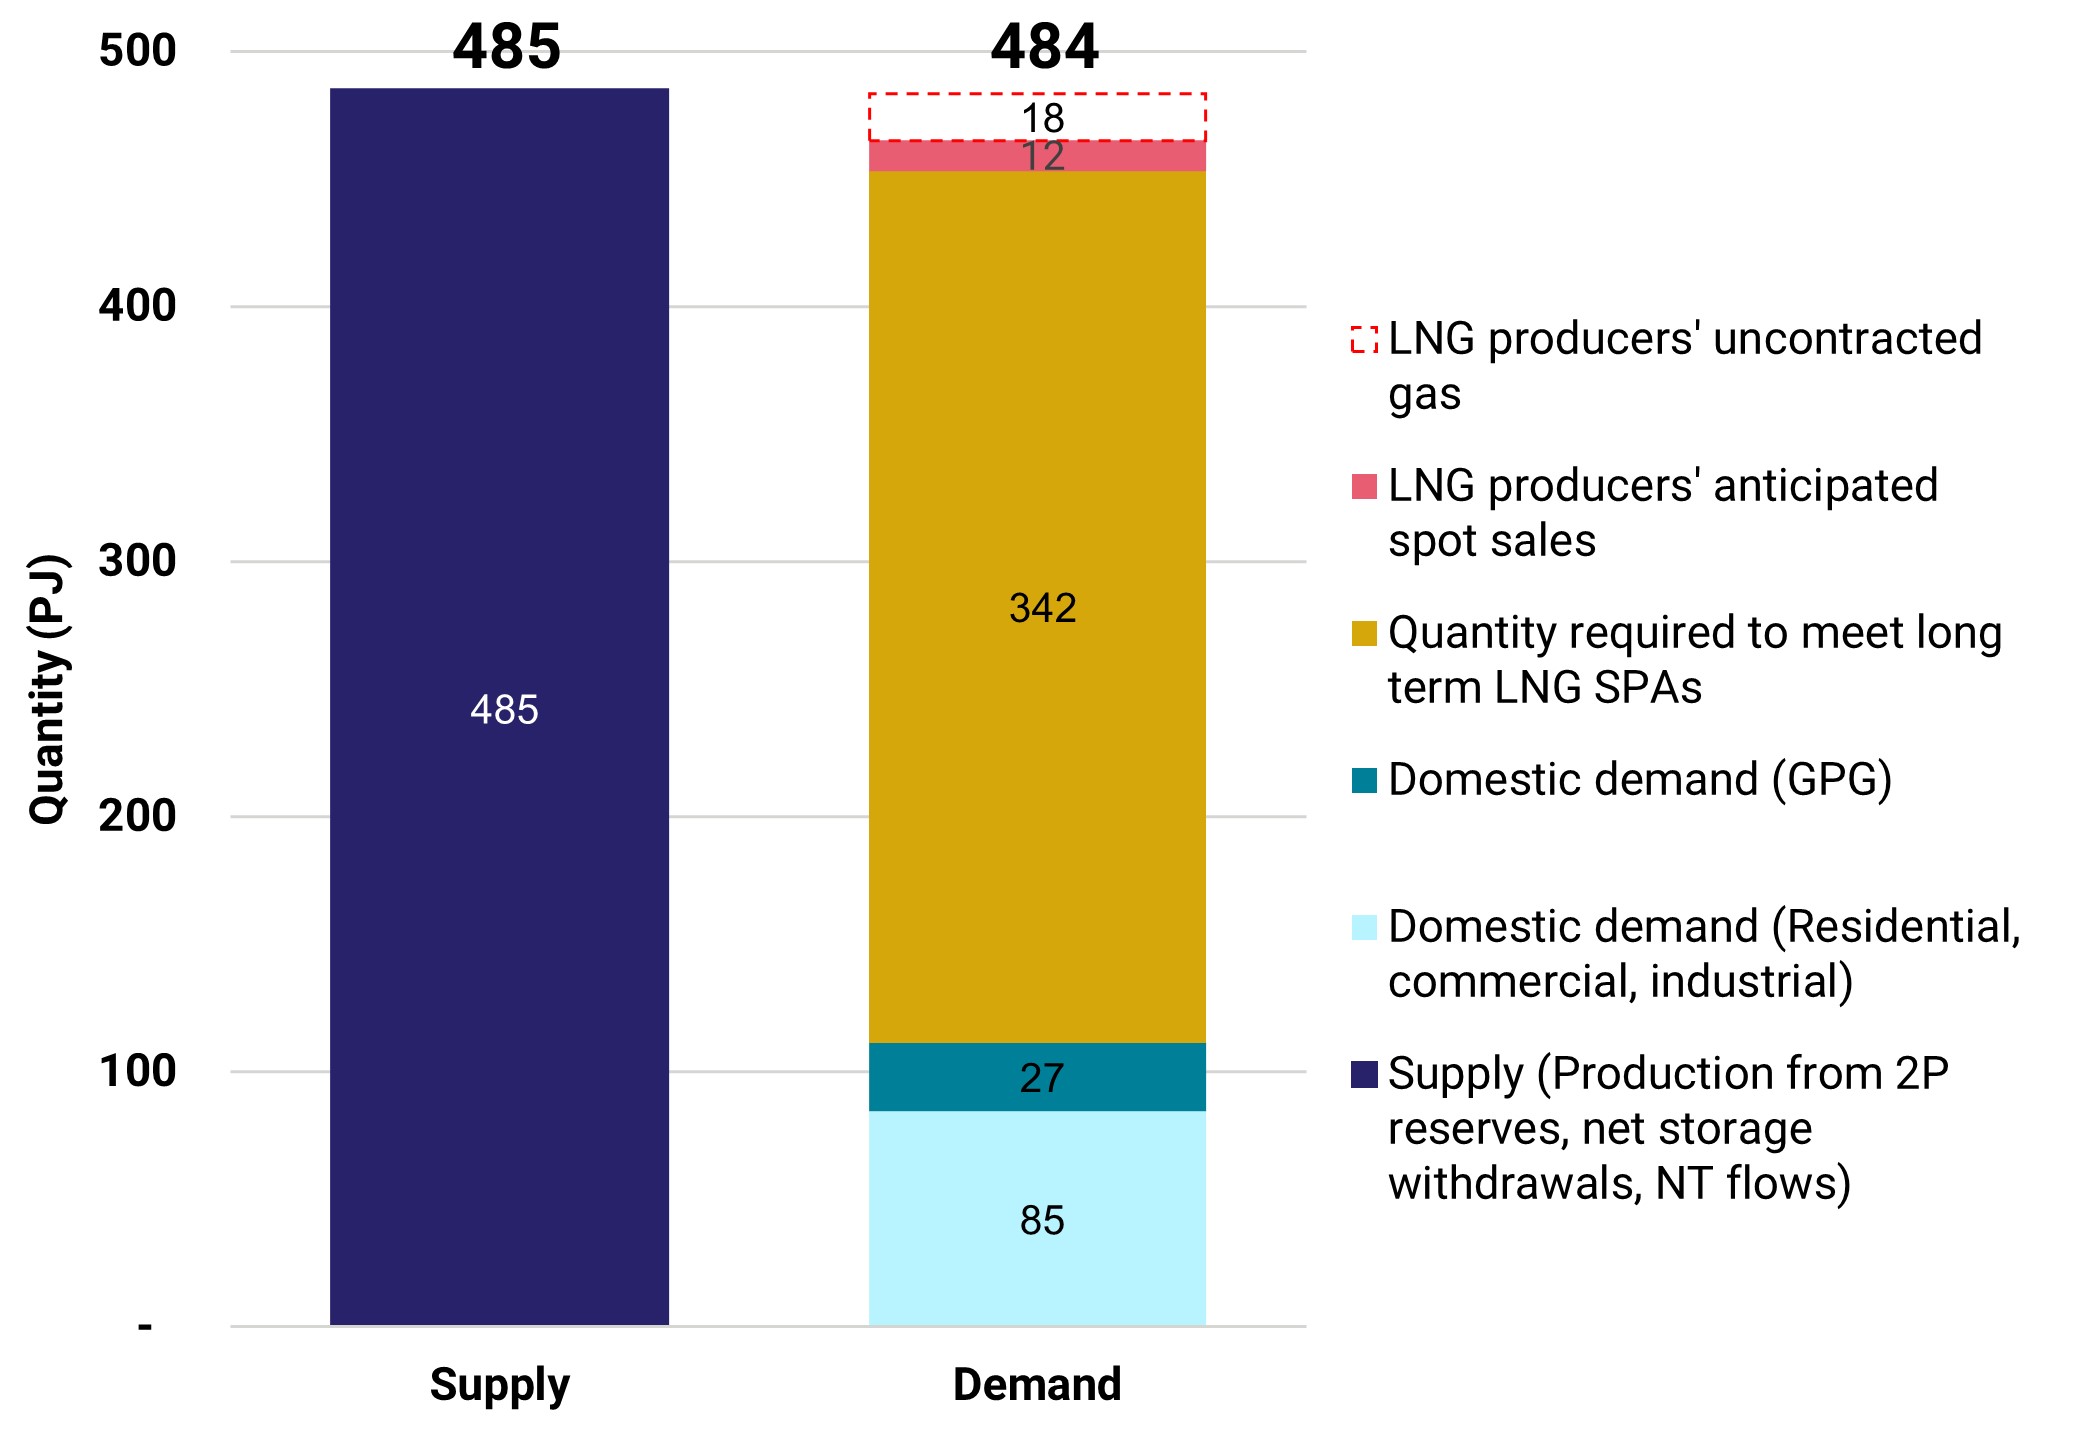 The supply and demand forecast for the domestic gas market shows a 1 petajoule surplus for the first quarter of 2024.